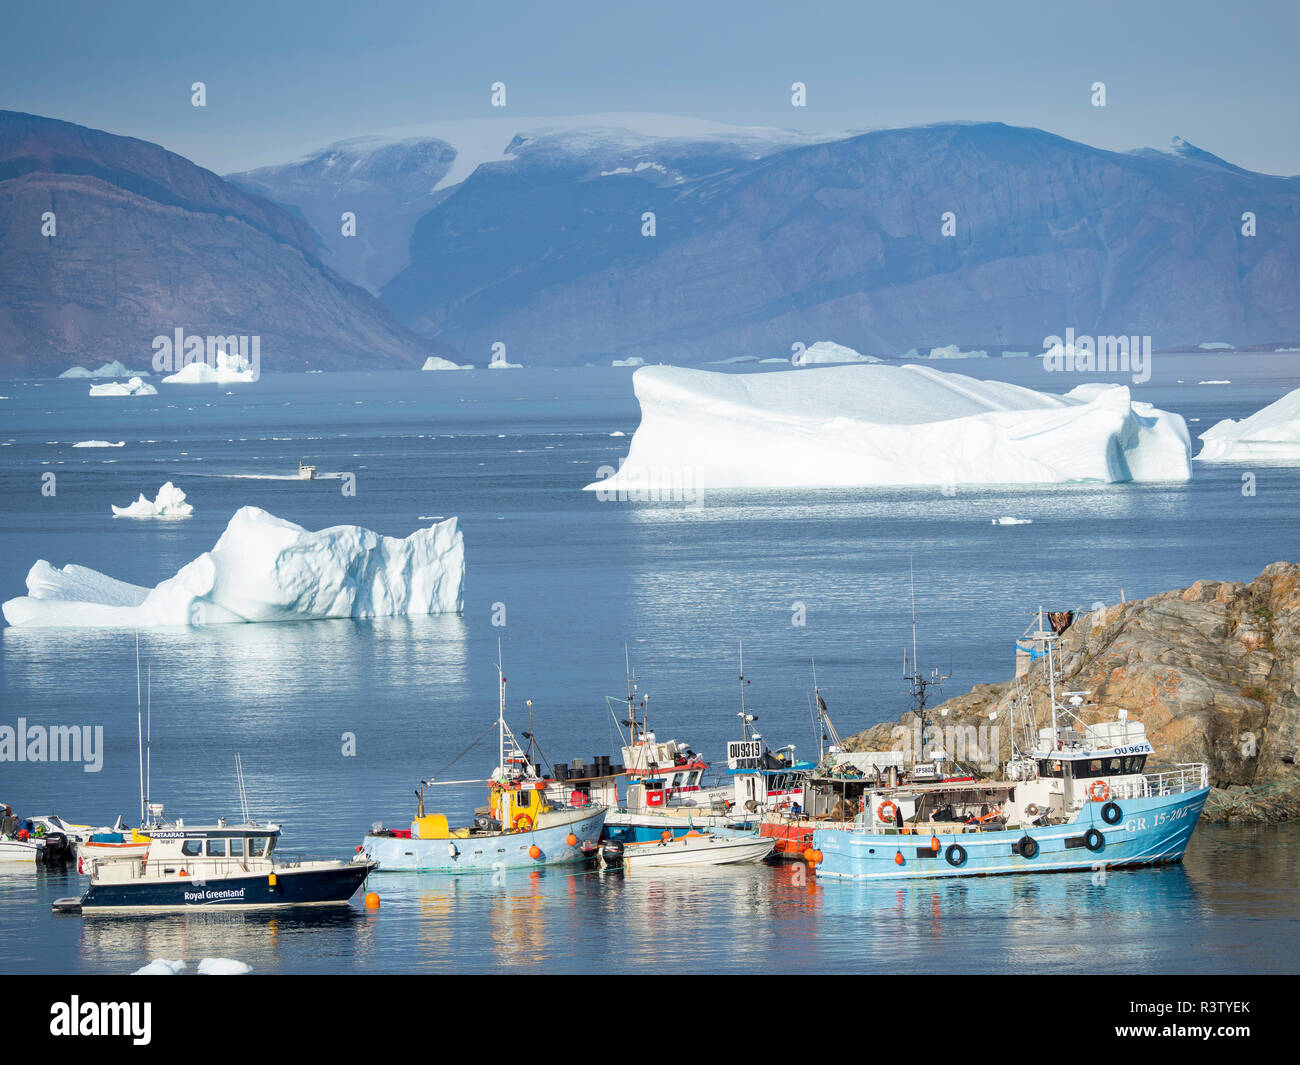 Harbor with typical fishing boats. Small town of Uummannaq in northwest Greenland, Denmark (Editorial Use Only) Stock Photo